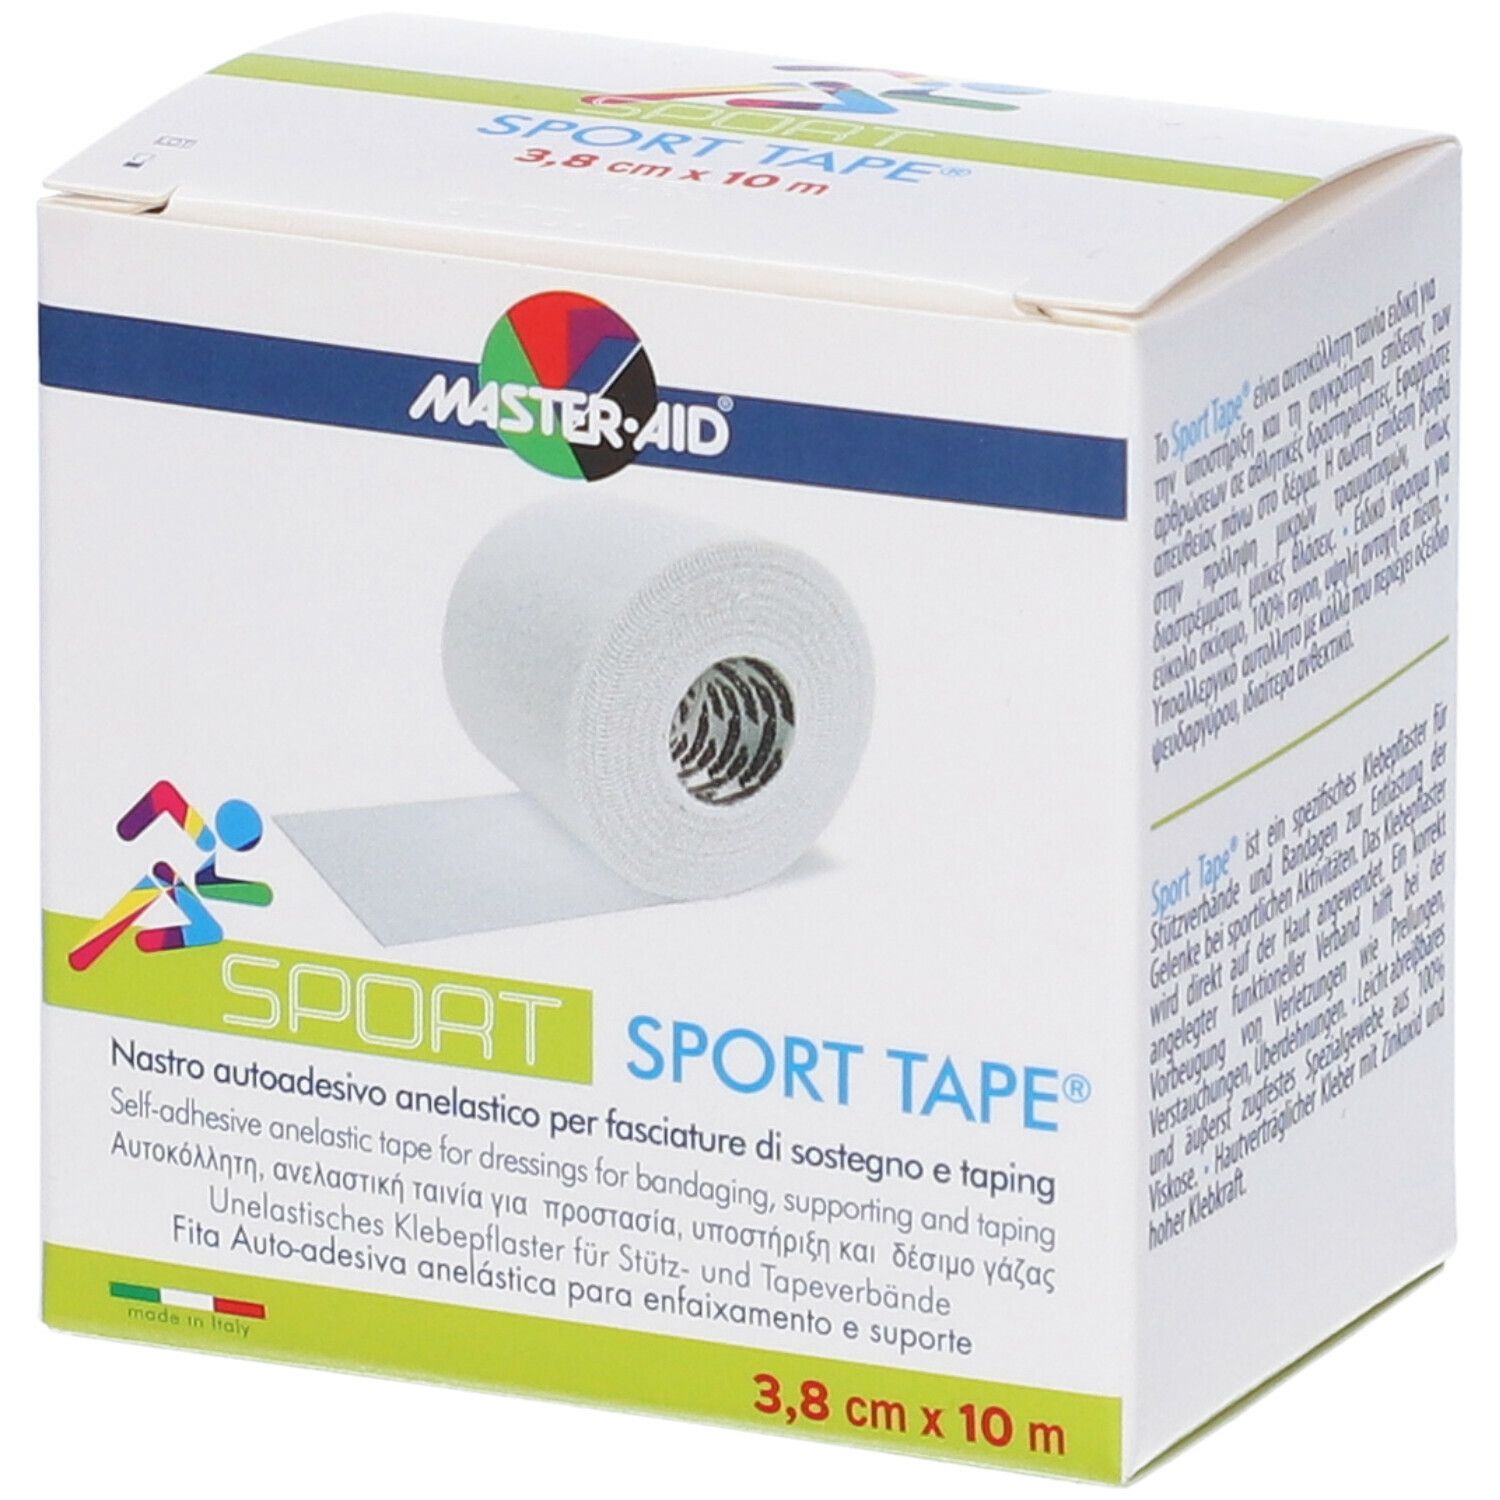 Image of Master•aid Sport Sport Tape